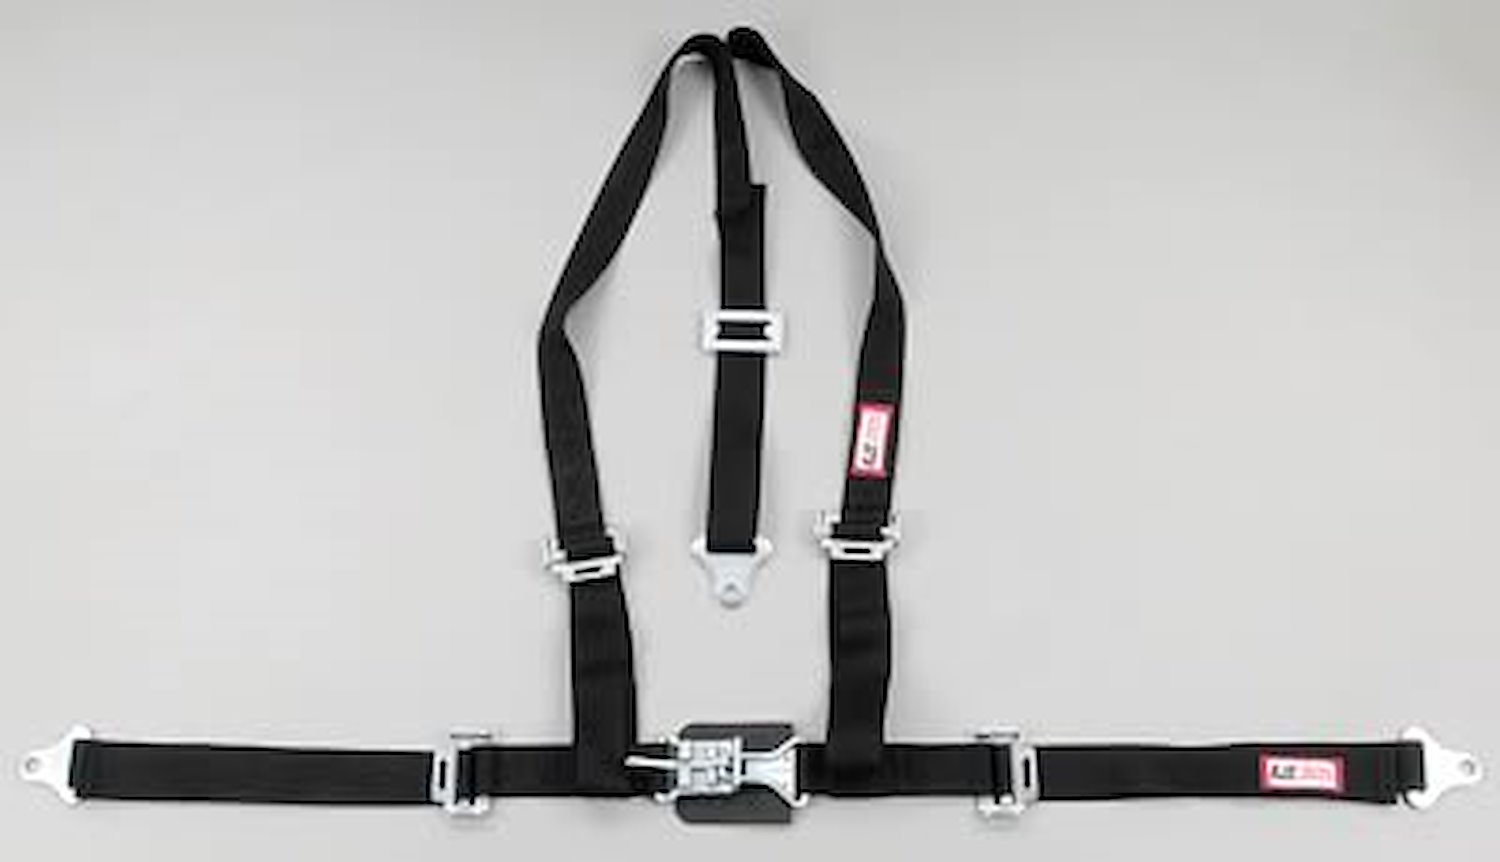 NON-SFI L&L HARNESS 3 PULL DOWN Lap Belt w/adjuster 2 S.H. Individual FLOOR Mount ALL WRAP ENDS YELLOW